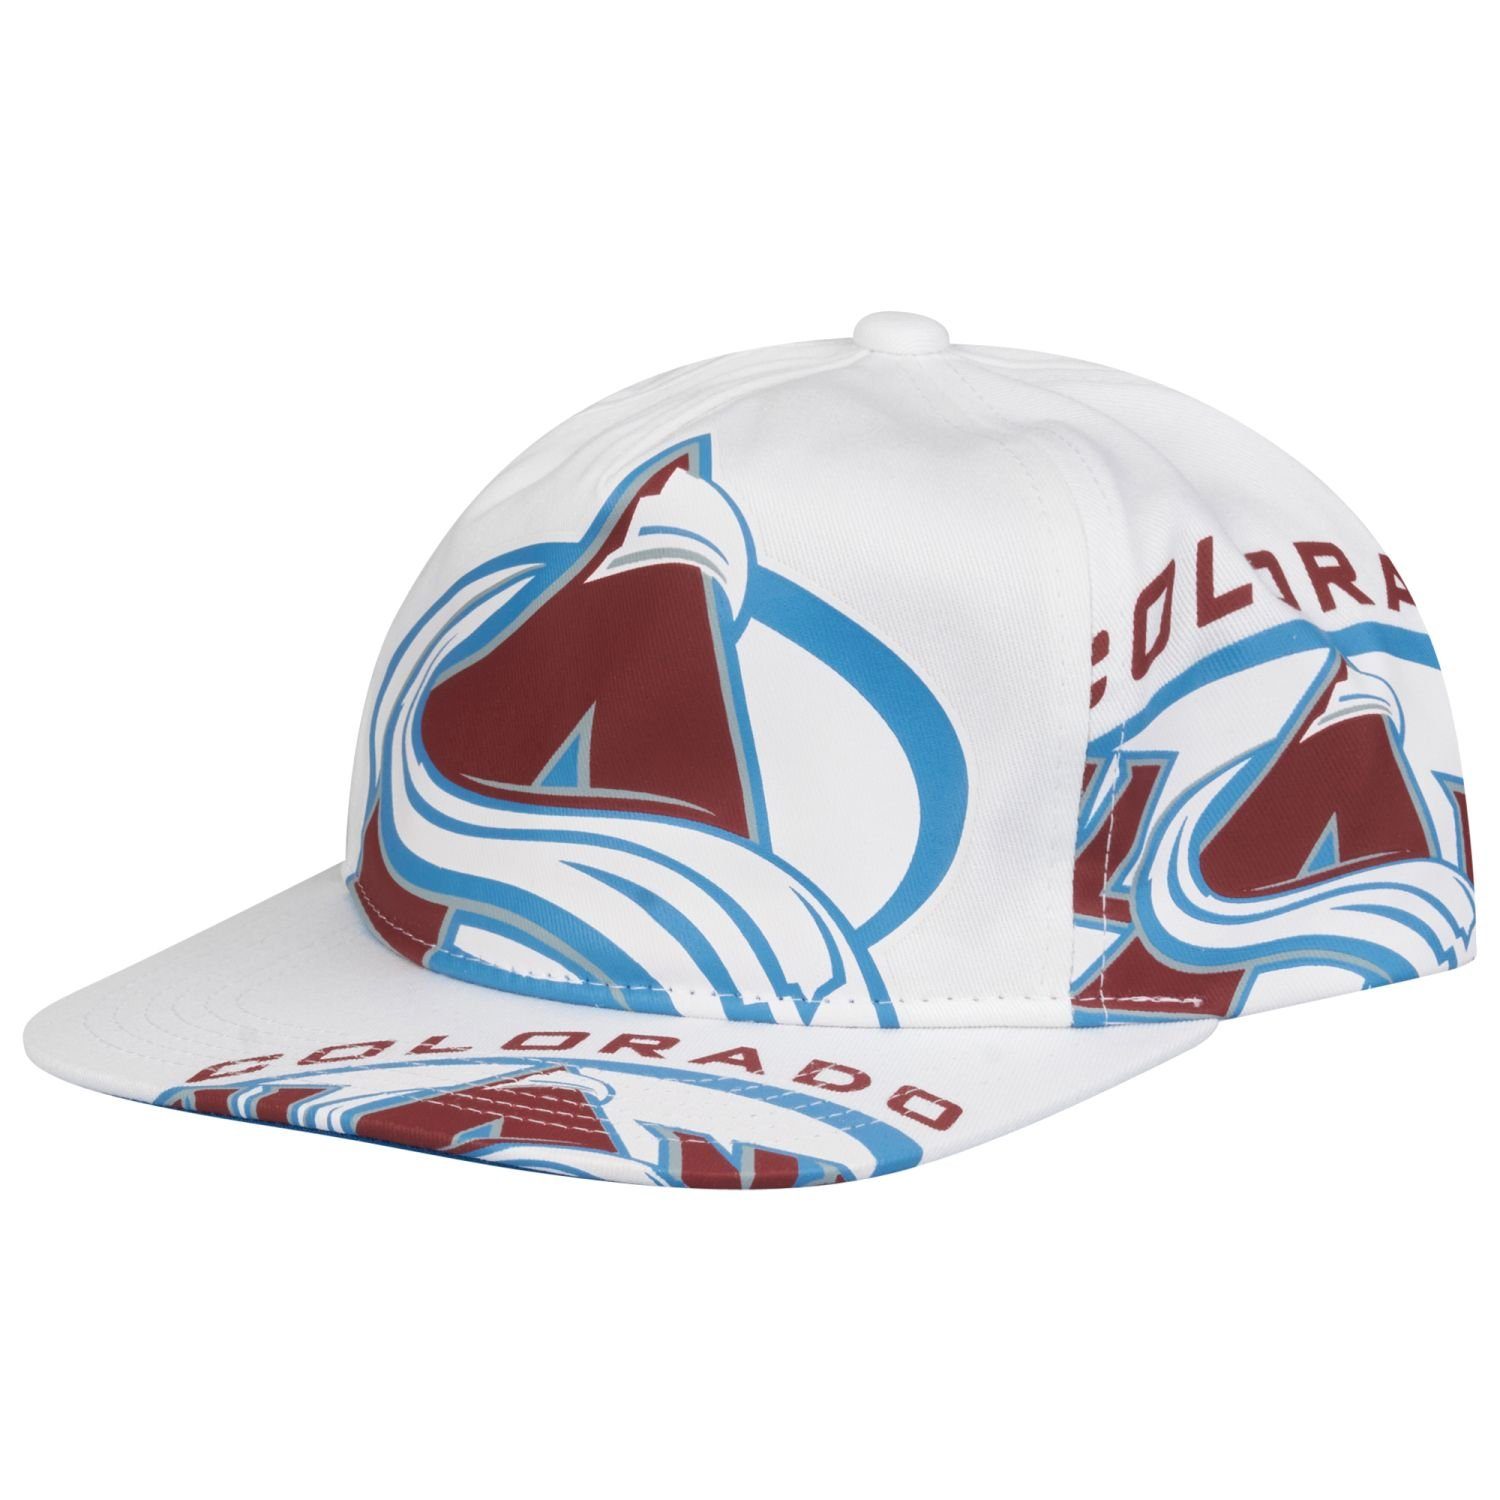 Mitchell & Ness Snapback Cap Unstructured DEADSTOCK Colorado Avalanche